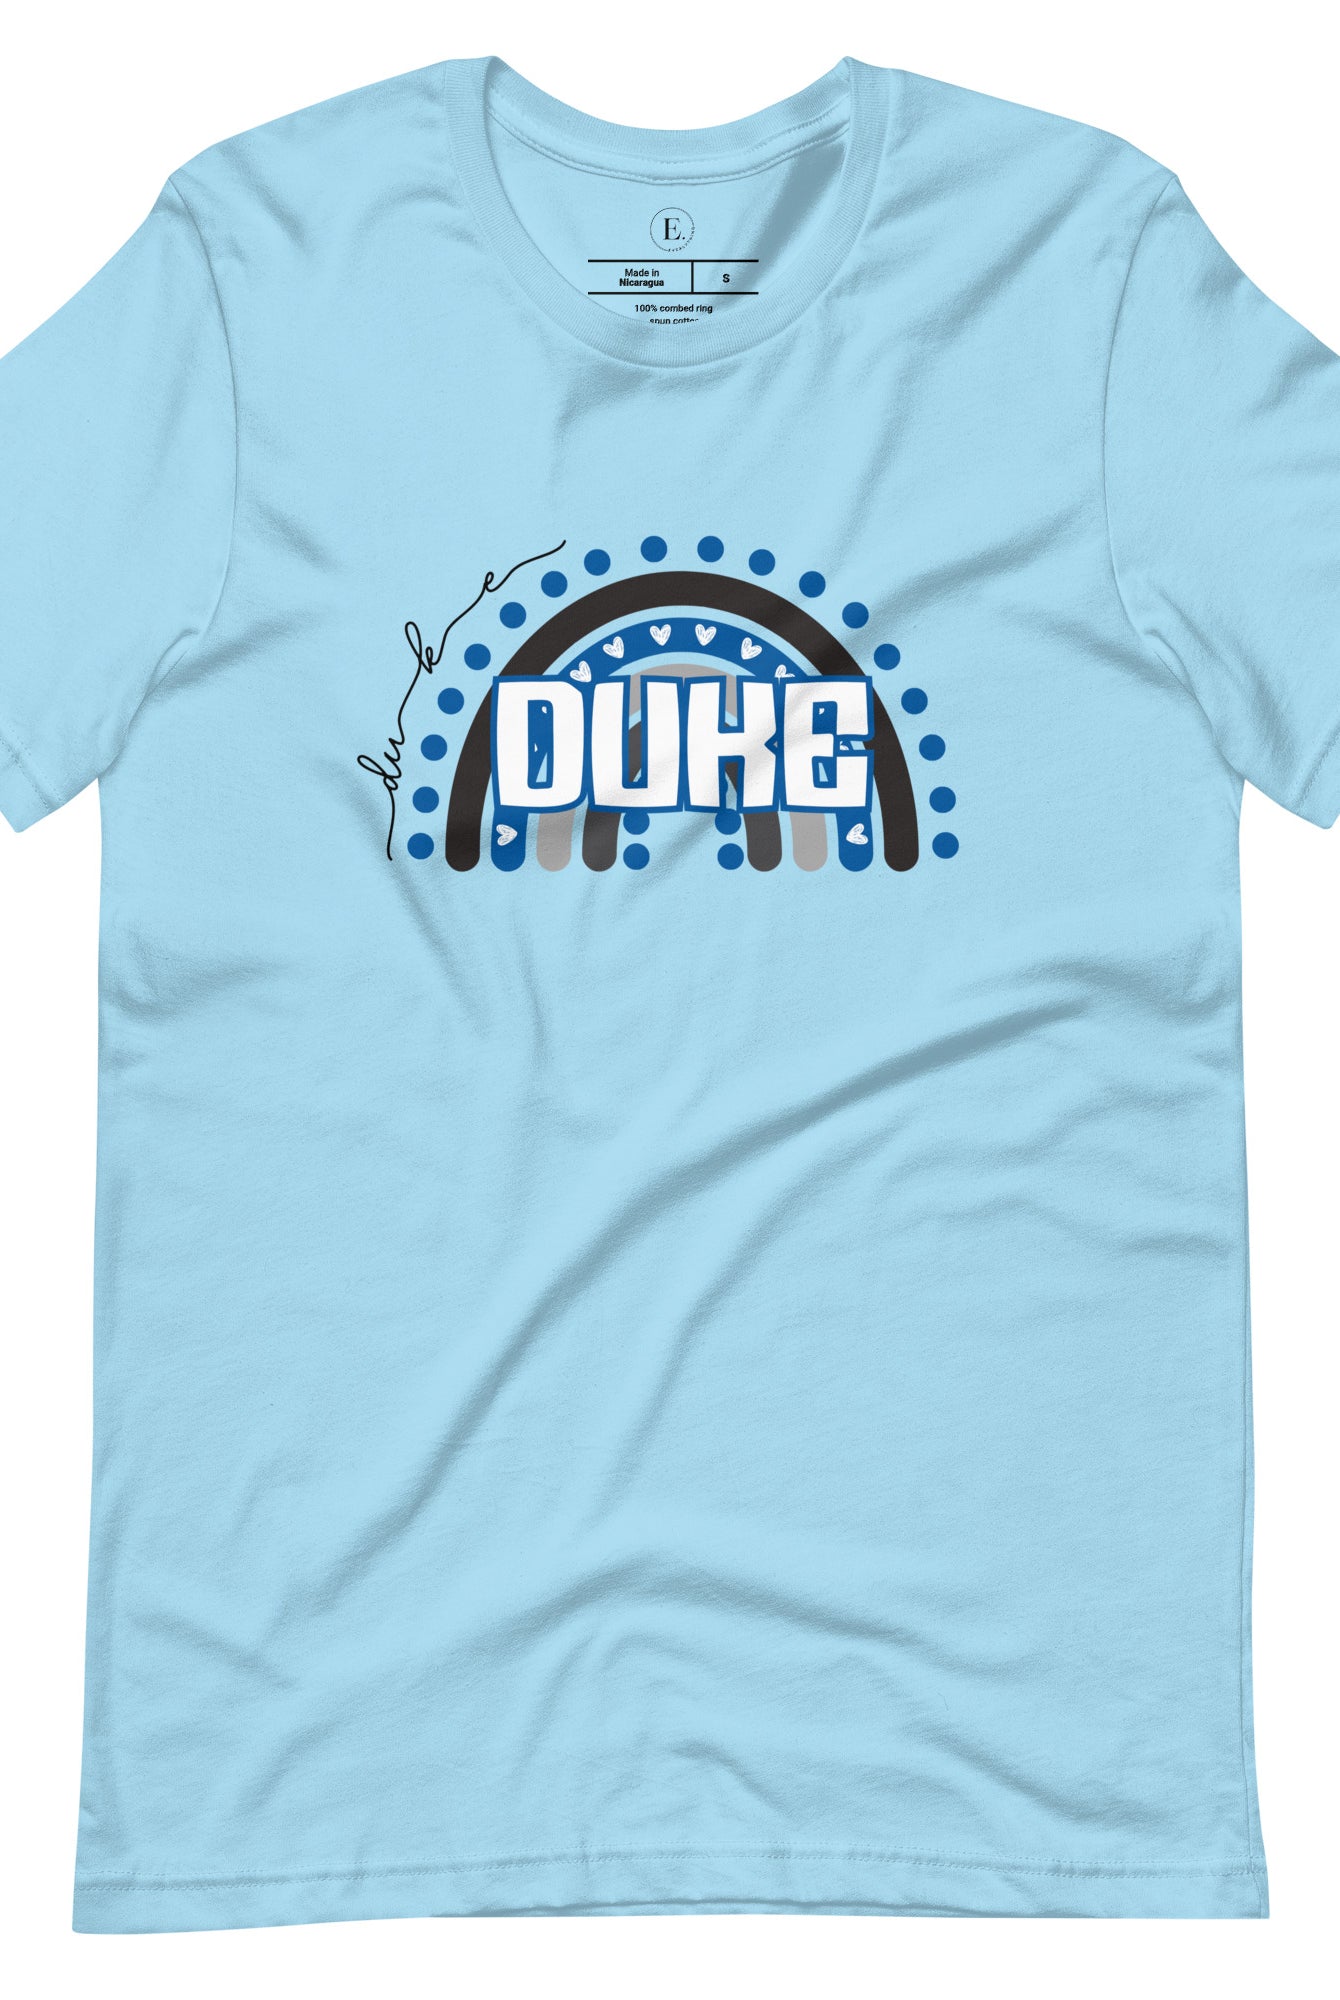 Celebrate diversity and show your support for Duke University with our eye-catching college t-shirt. Our shirt features the Duke colors on a captivating rainbow design, embodying the spirit of inclusion and unity with the iconic Duke wordmark atop the rainbow on an ocean blue shirt. 